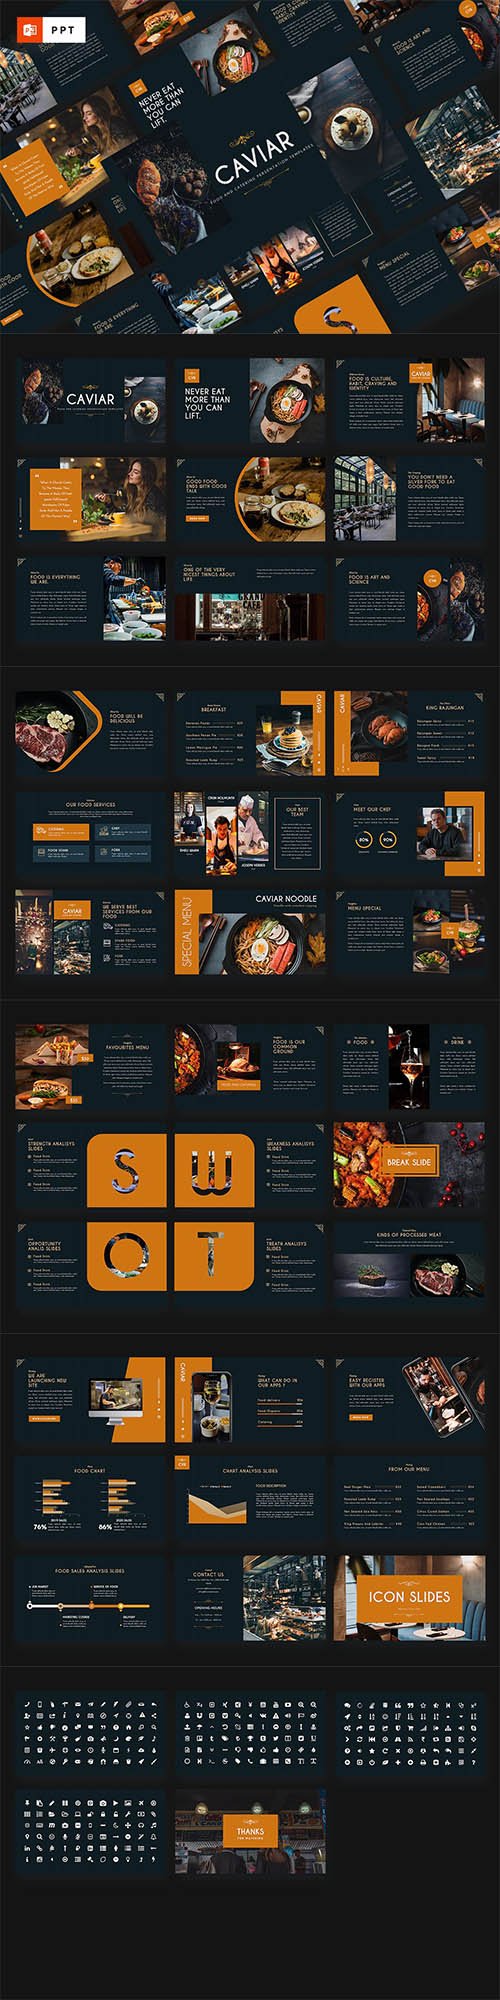 CAVIAR - Catering & Food Powerpoint Template